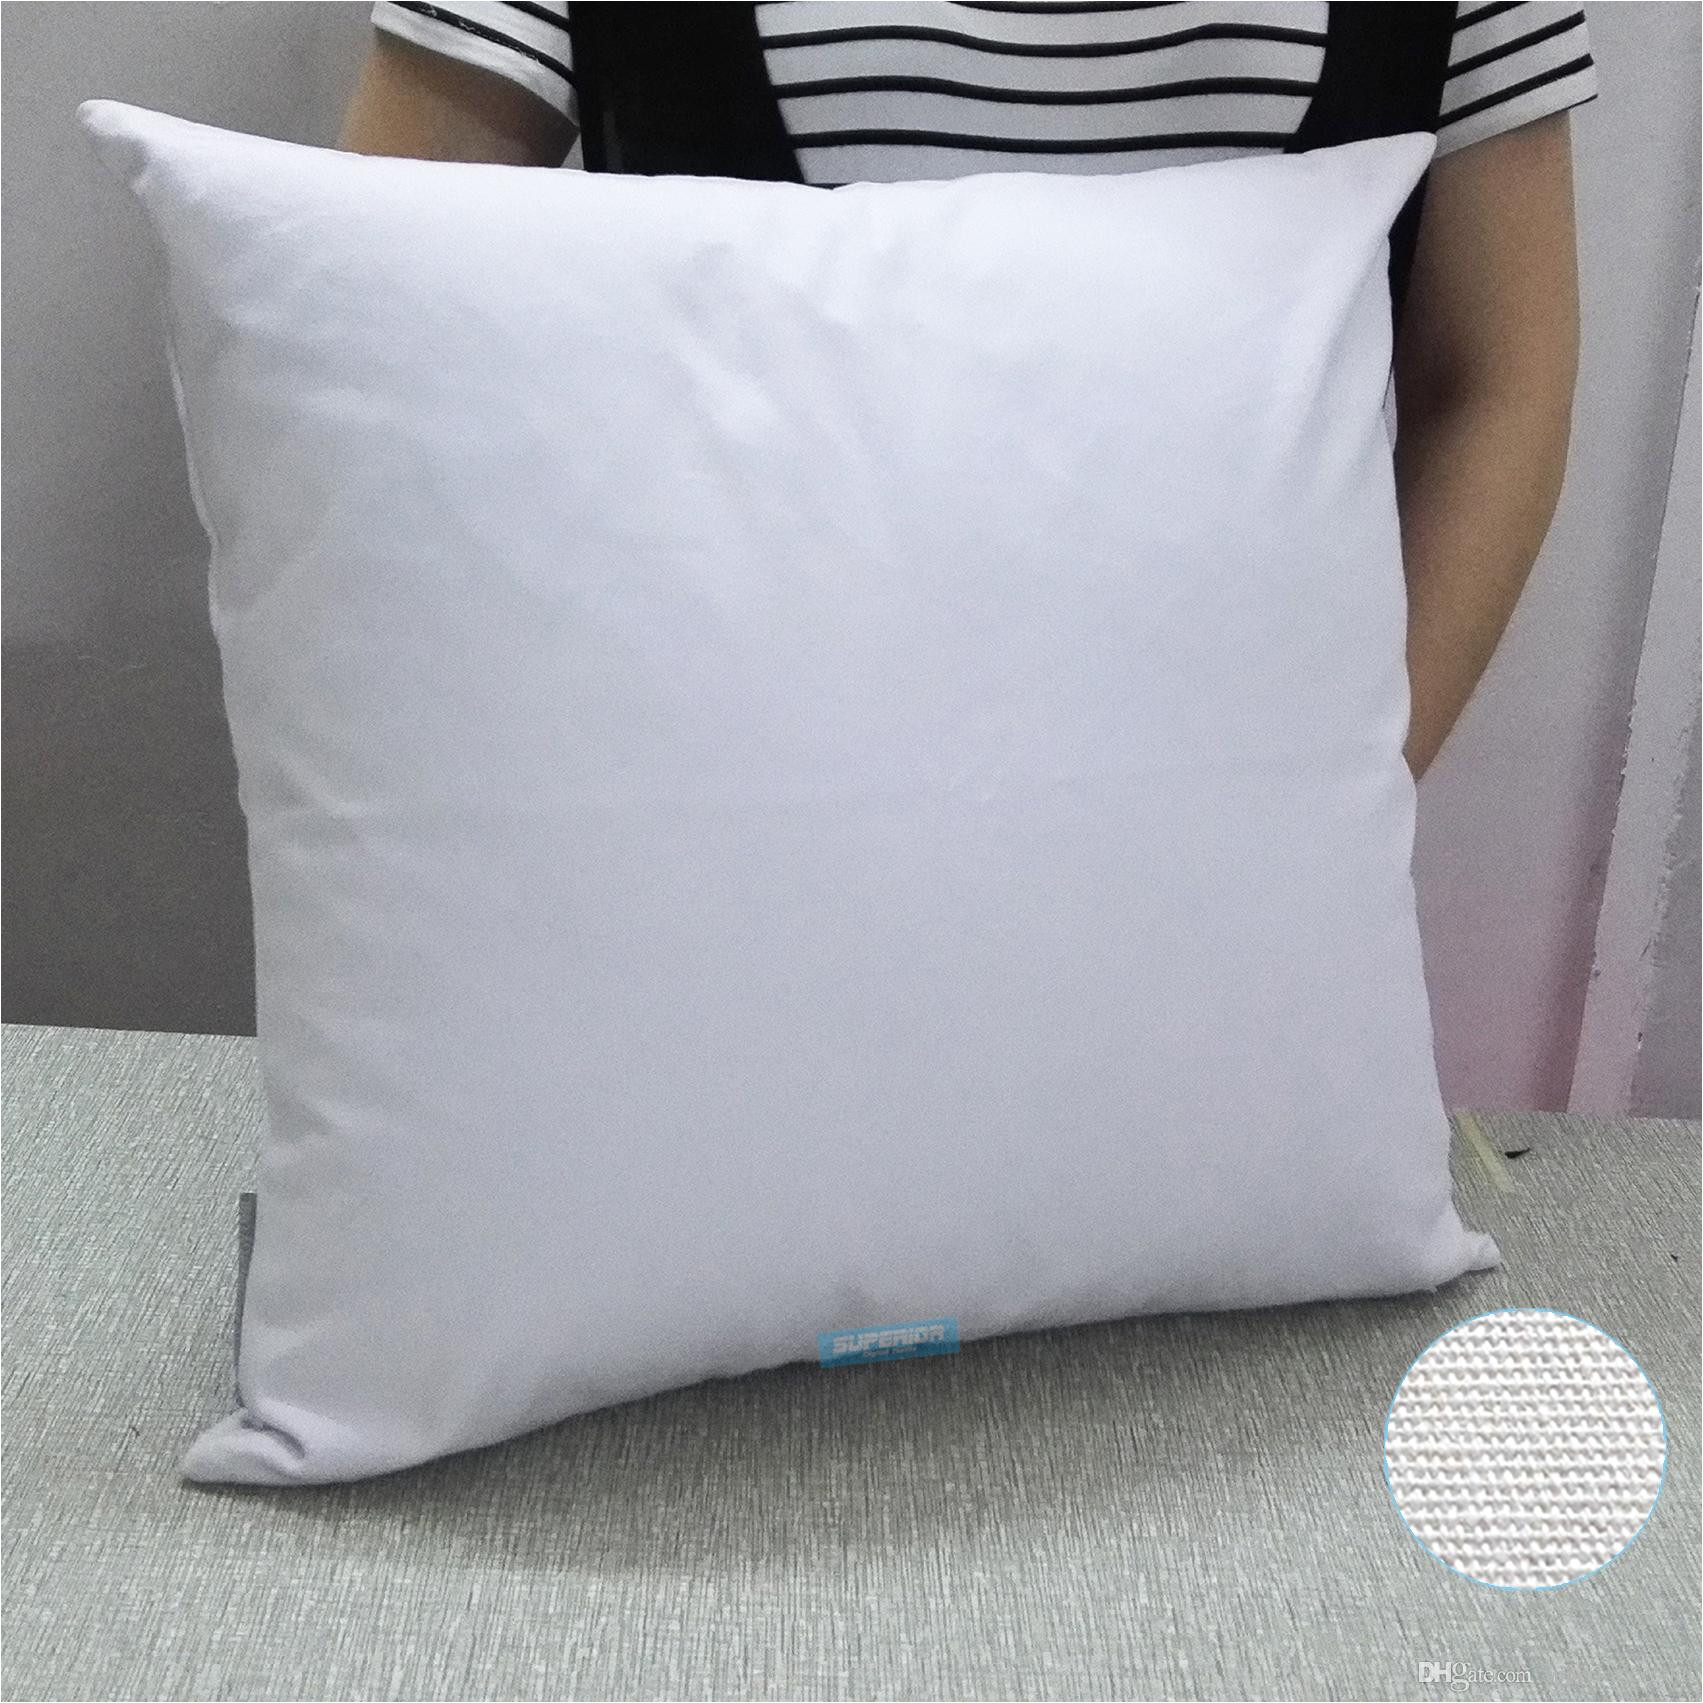 19x19 inches 8oz white or natural cotton canvas blank pillow cover clean surface perfect for stencils painting embroidery htv patio furniture seat